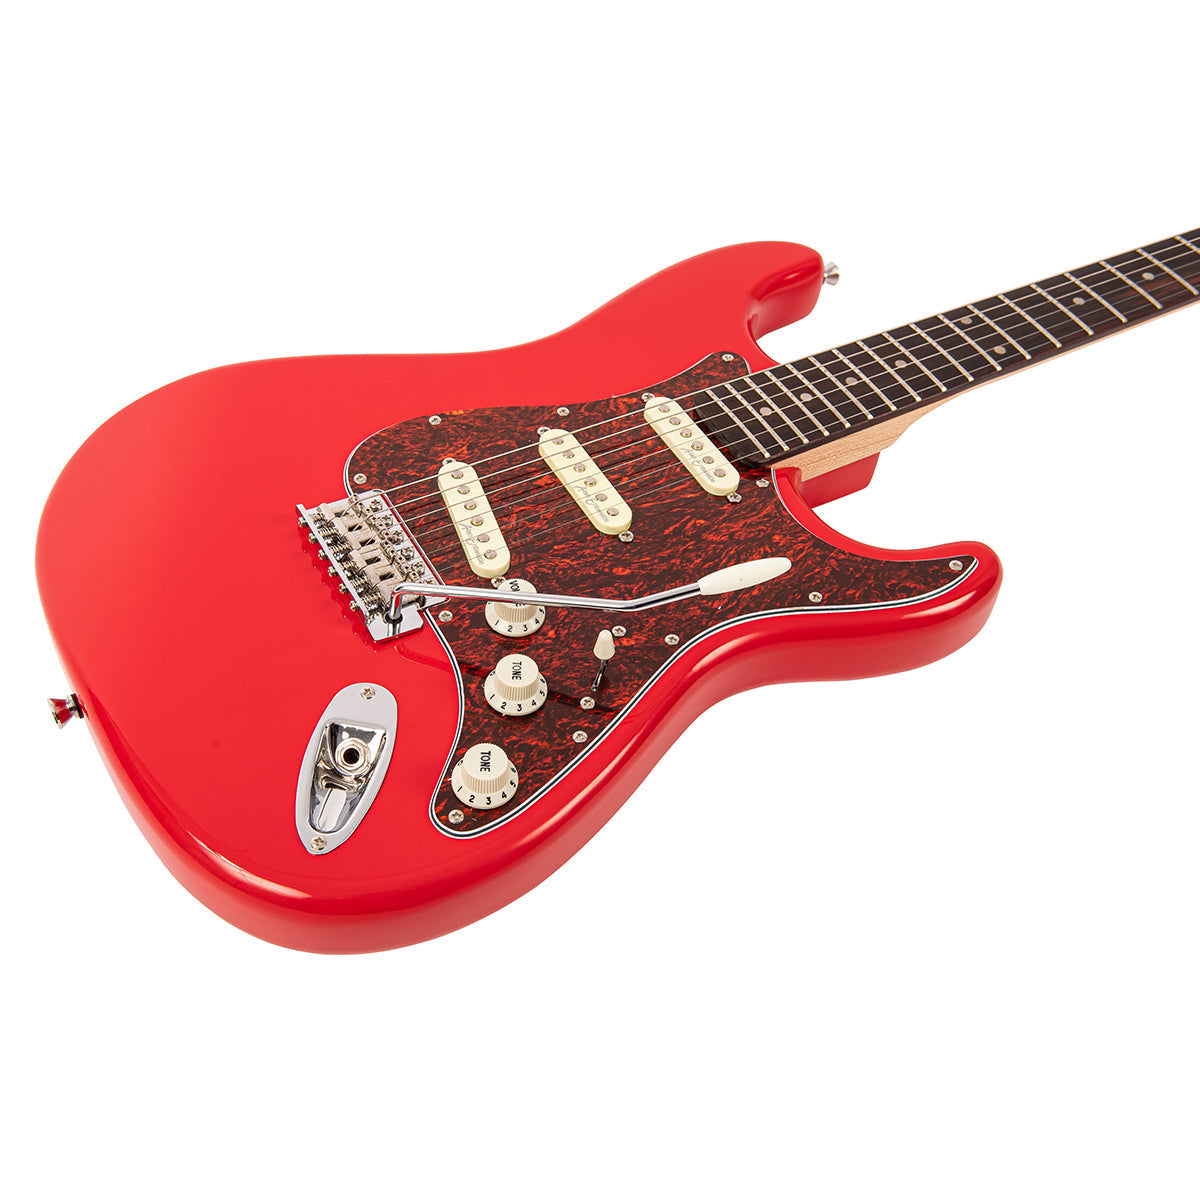 Vintage V60 Coaster Series Electric Guitar Pack ~ Gloss Red, Electric Guitar for sale at Richards Guitars.